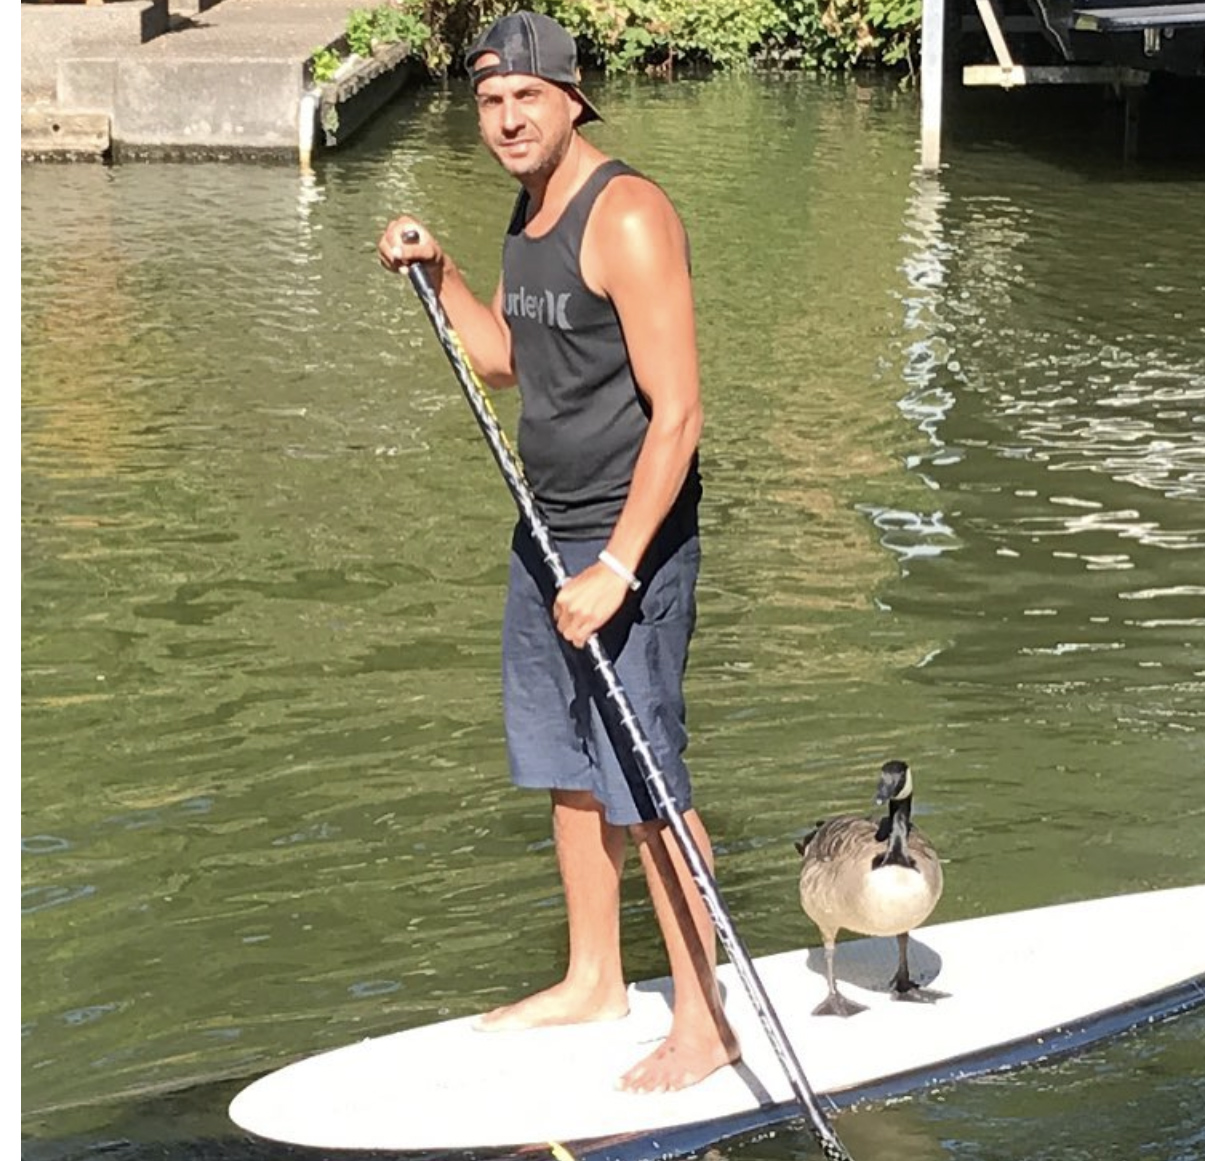 Mike and Kyle paddleboarding